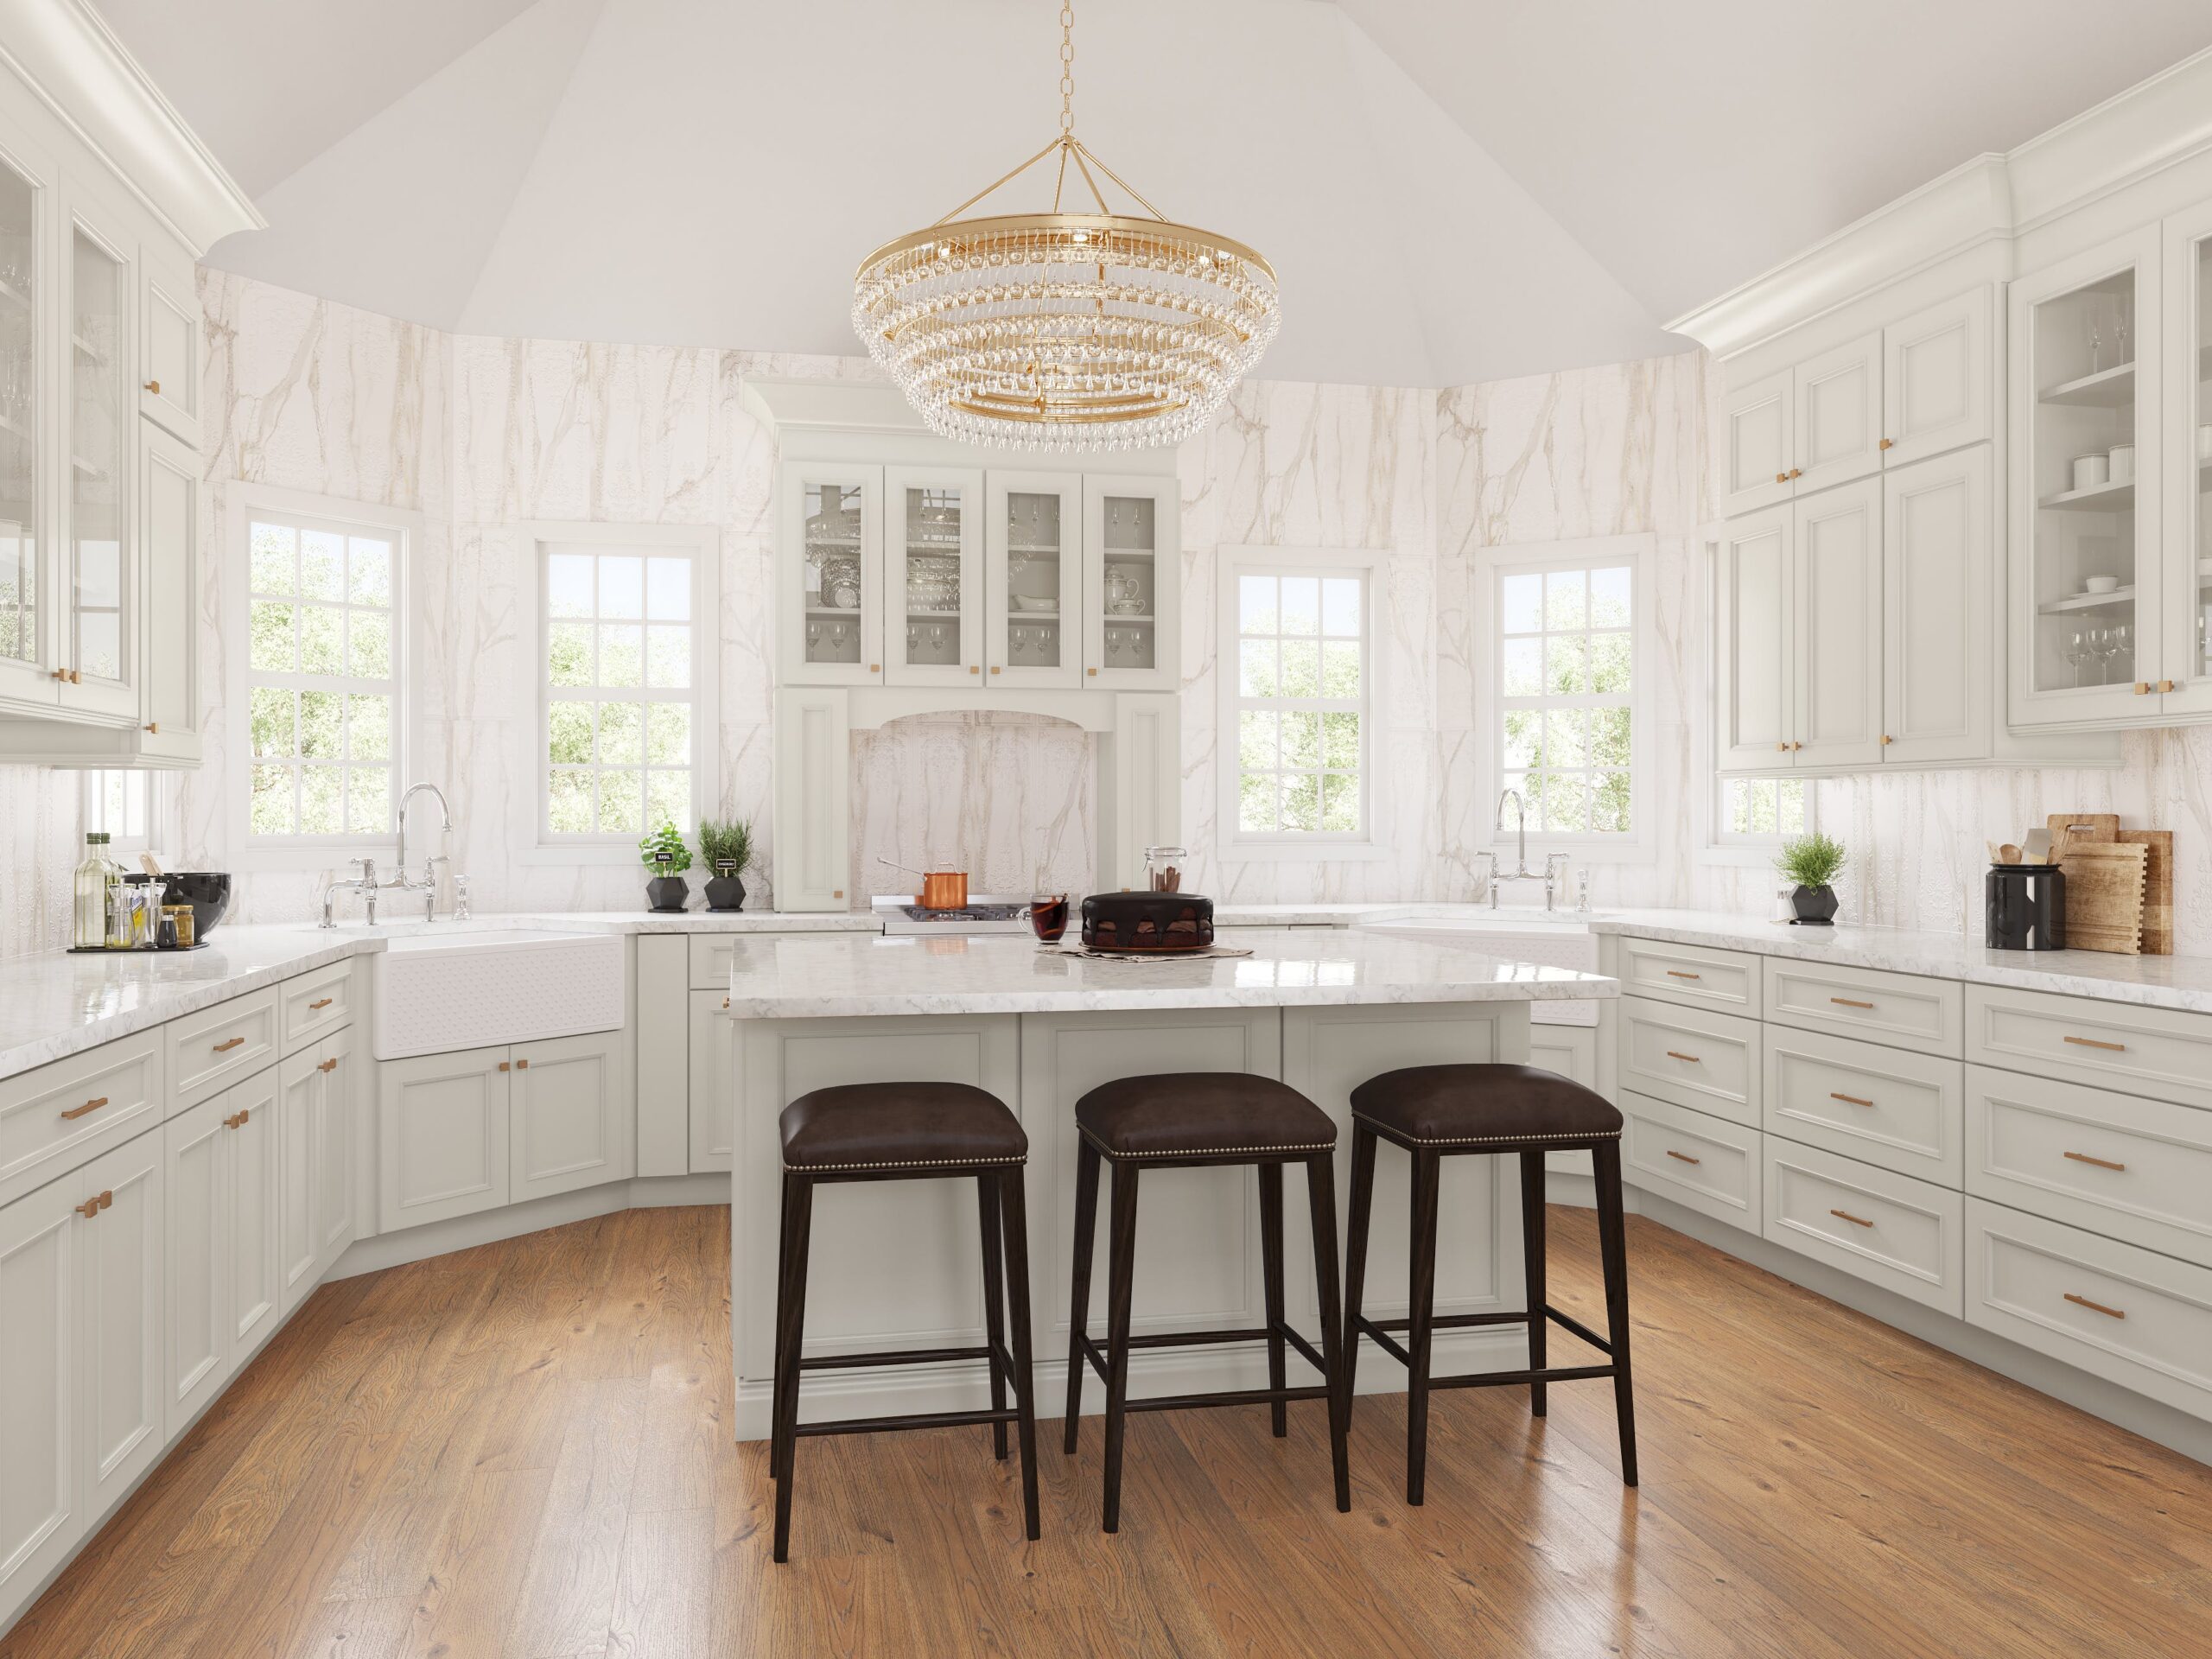 Design Your Dream Kitchen With Fabuwood Cabinets